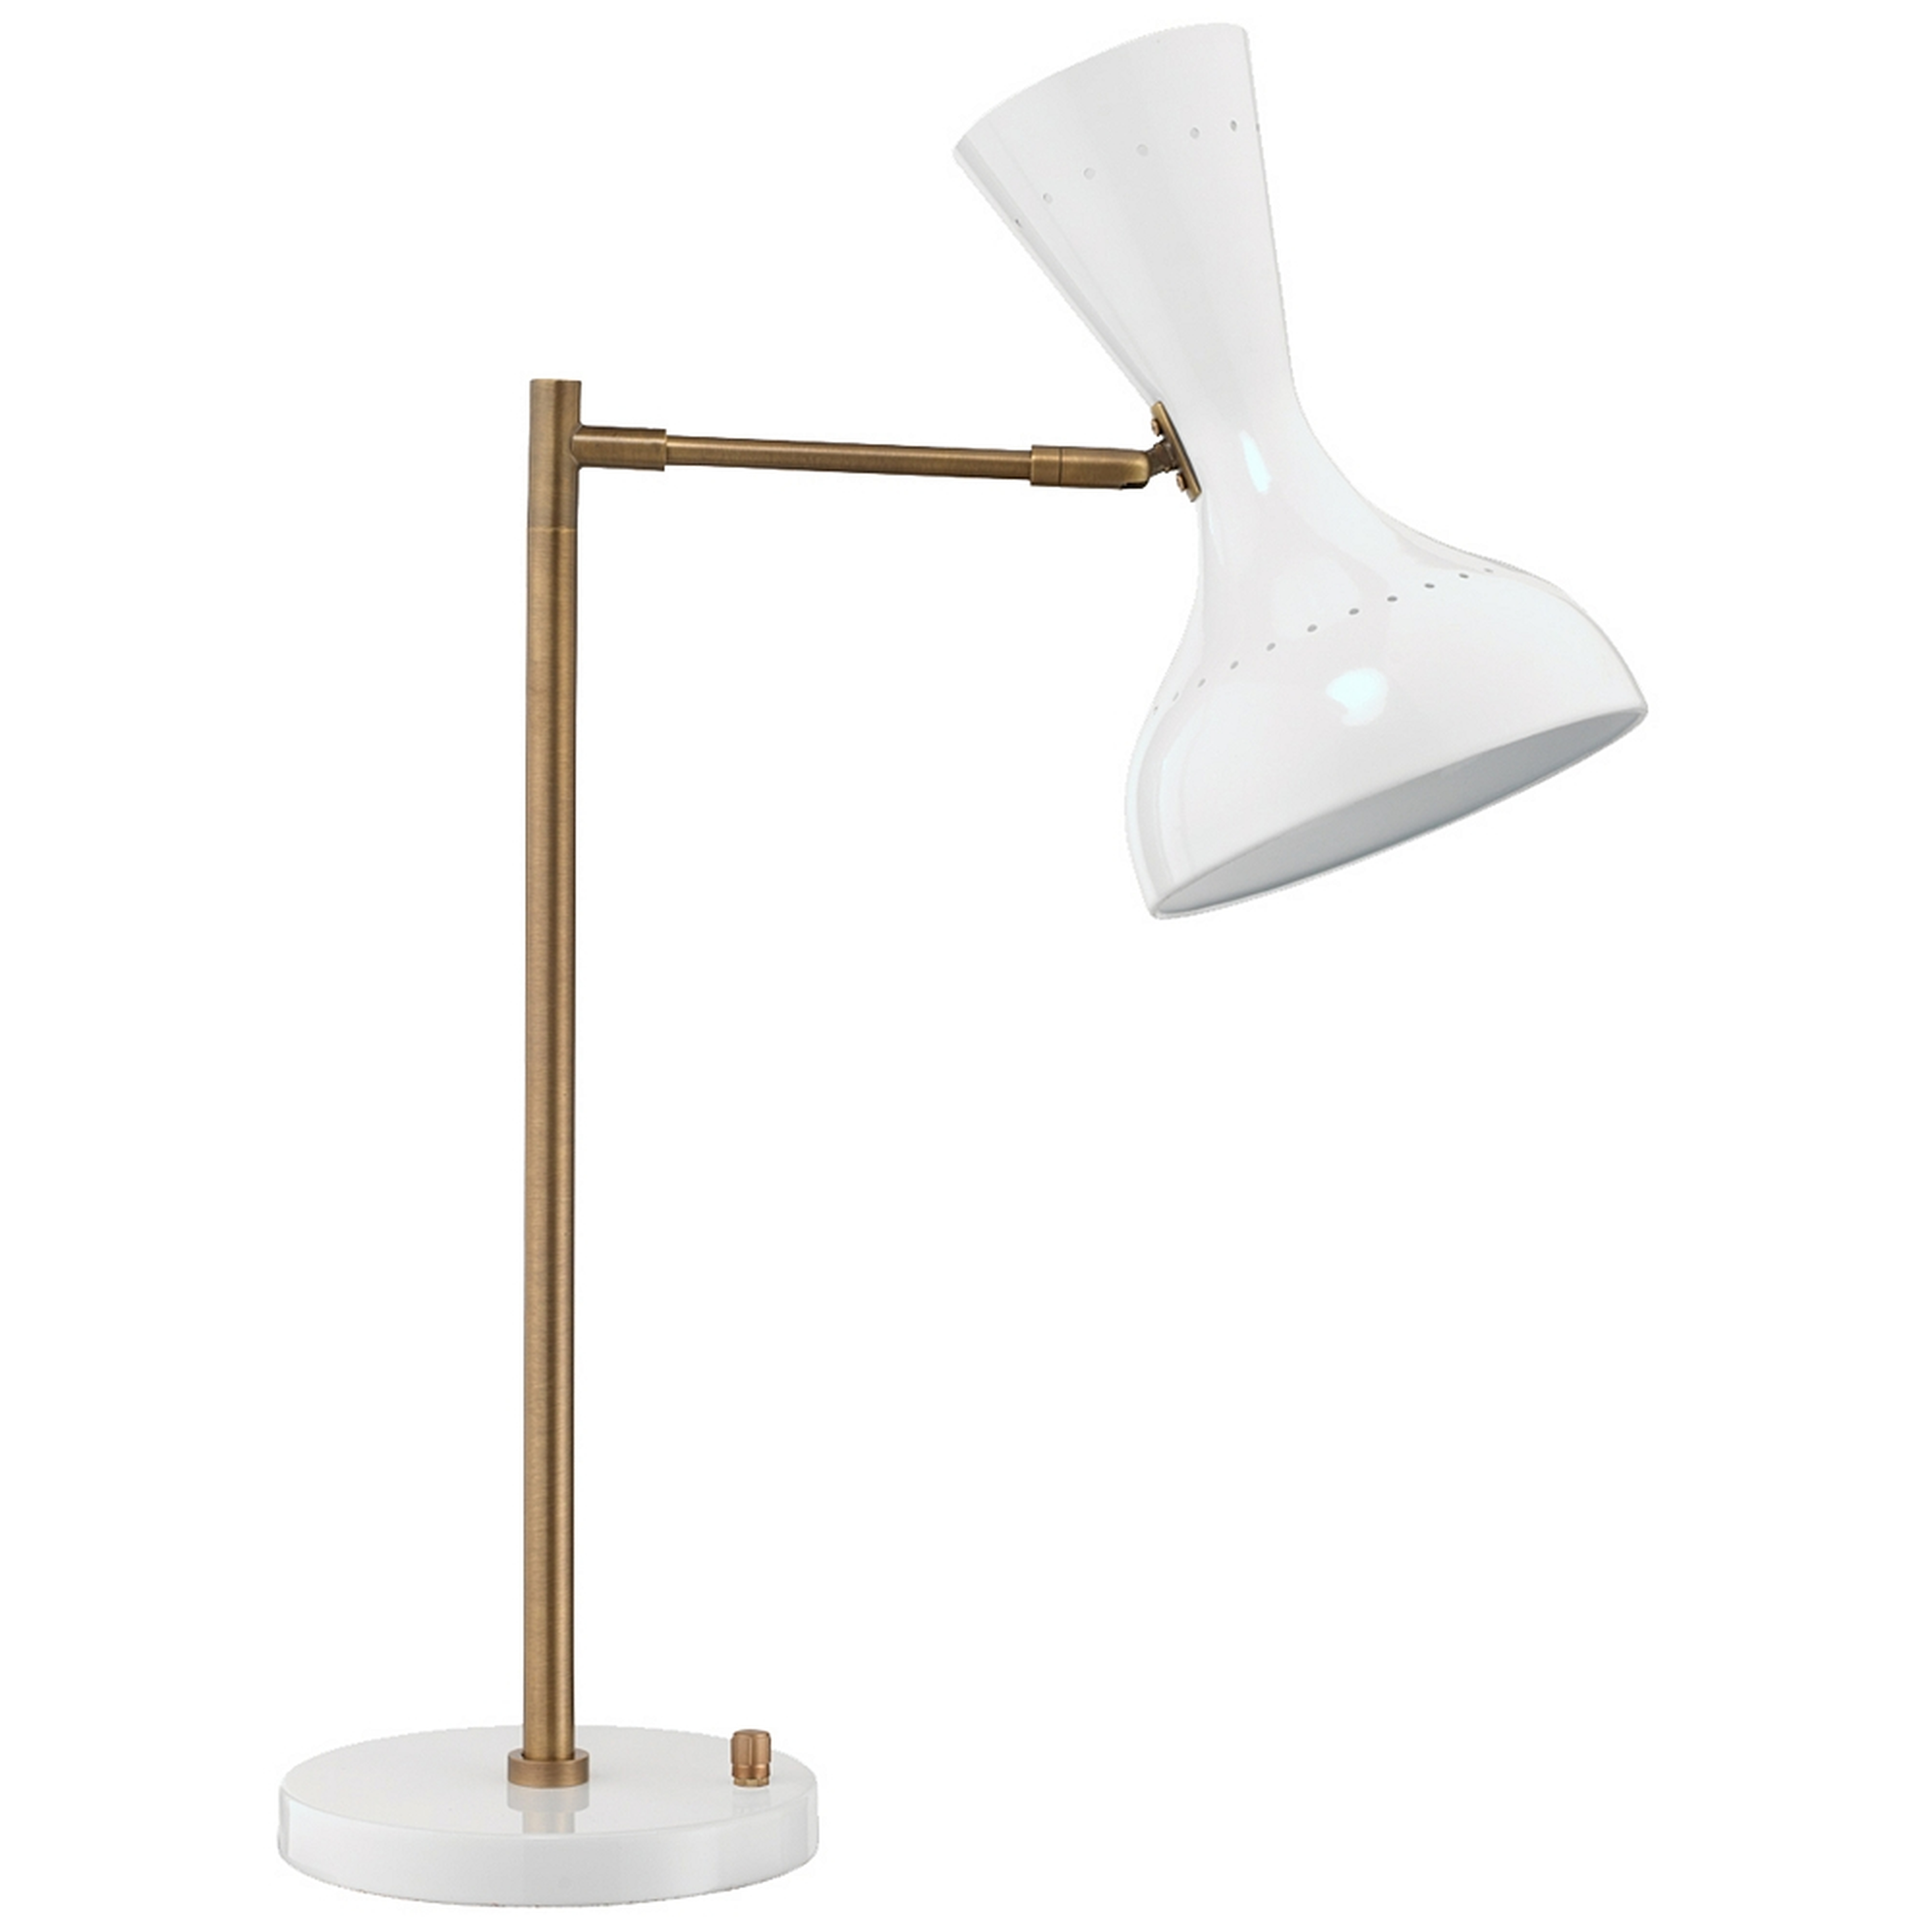 Pisa White Lacquer and Antique Brass 2-Directional Desk Lamp - Style # 67V74 - Lamps Plus